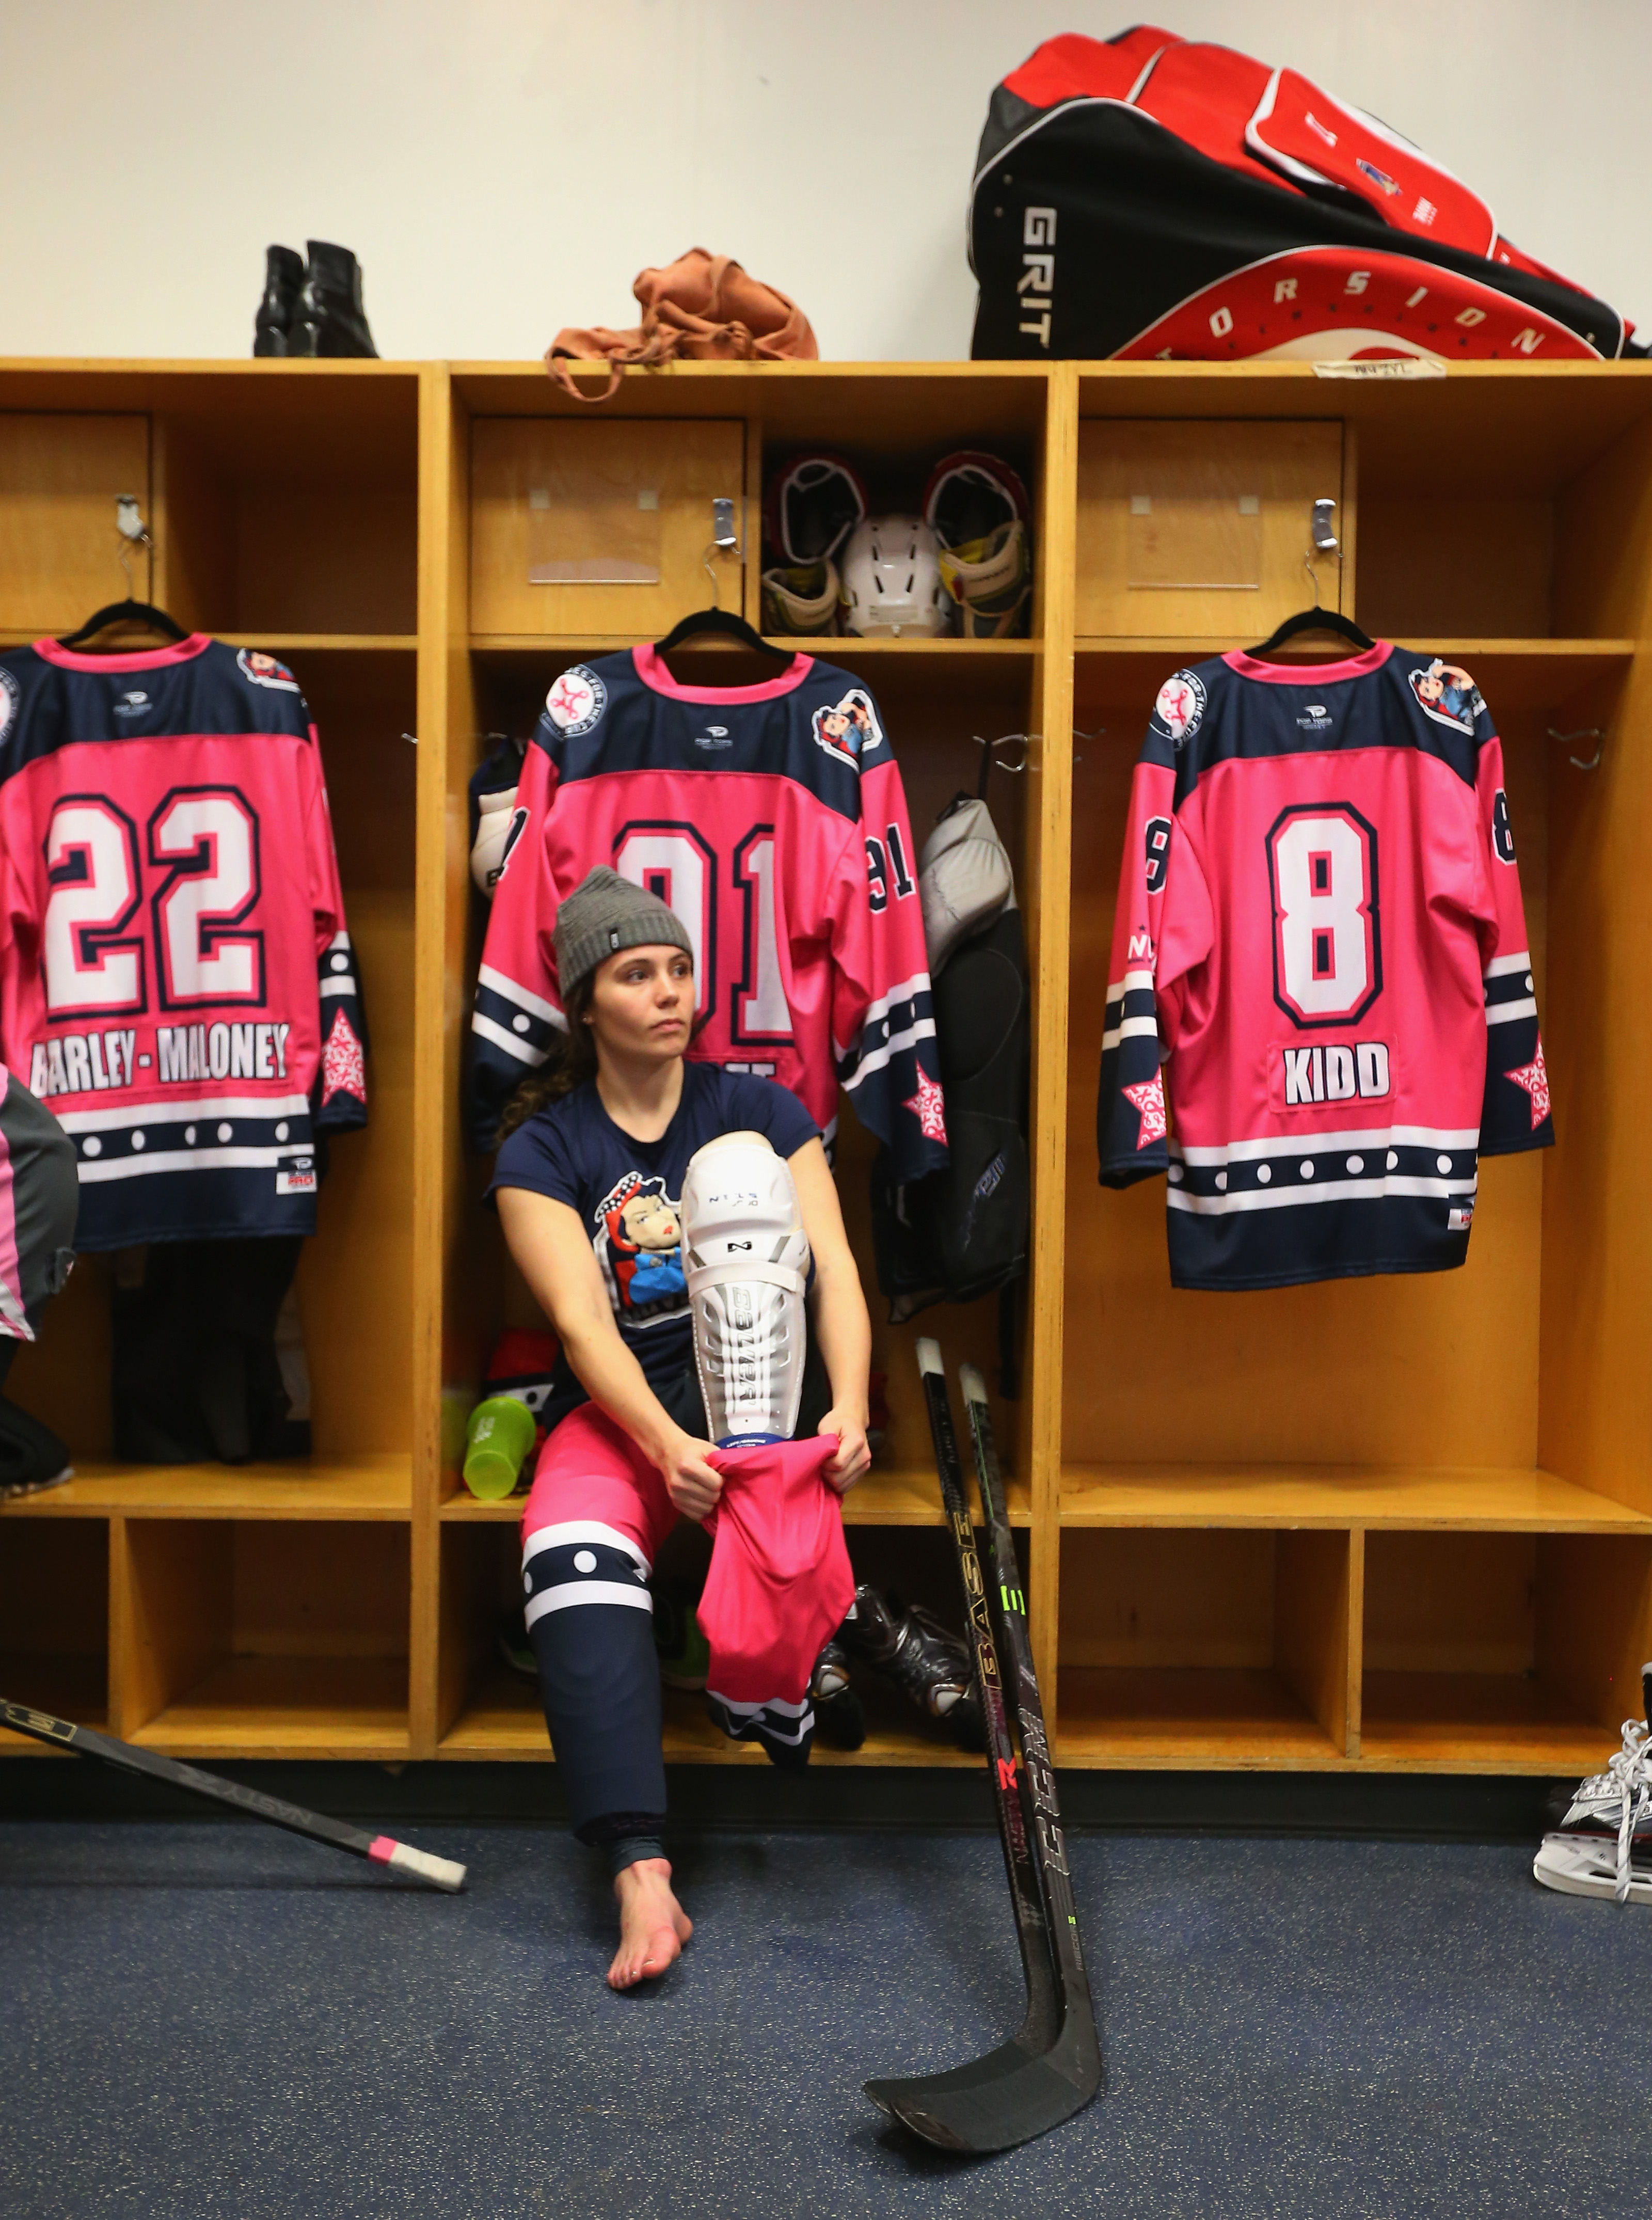 A Day In The Life Of The New York Riveters Women's Hockey Team